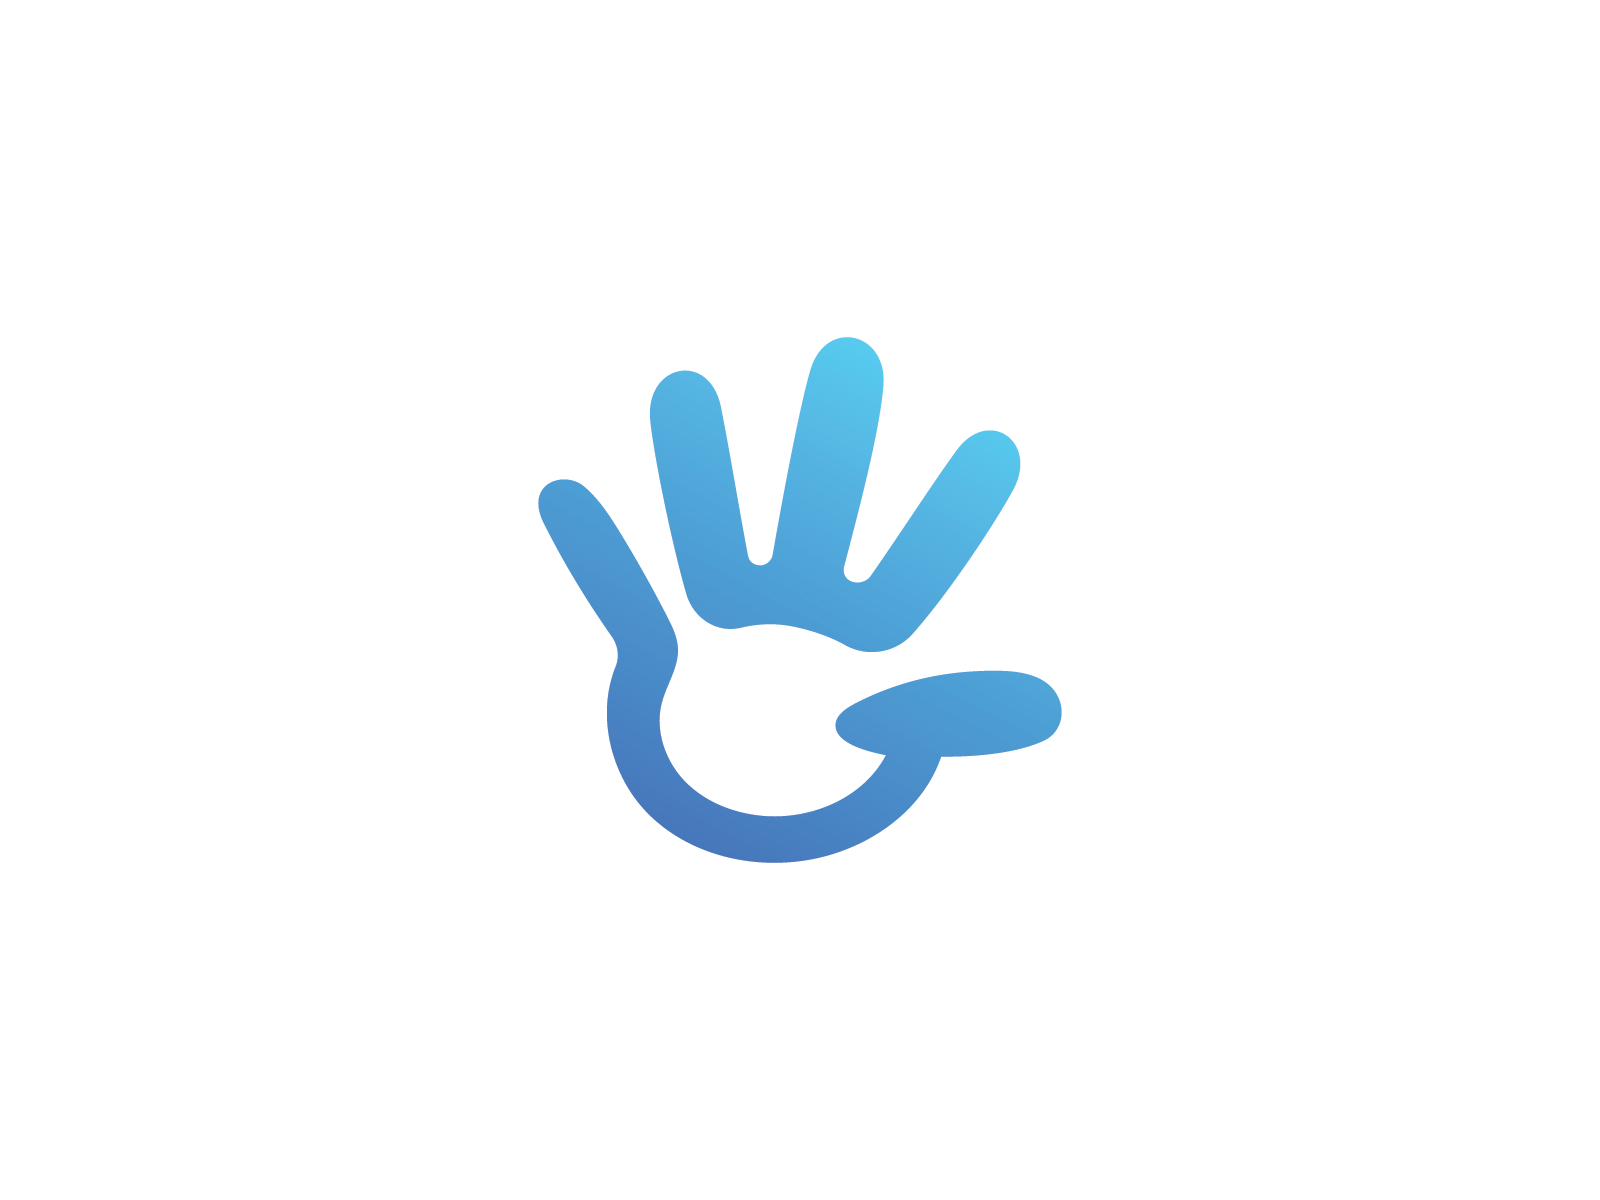 WG and Hand by Ryan Agustian R. on Dribbble